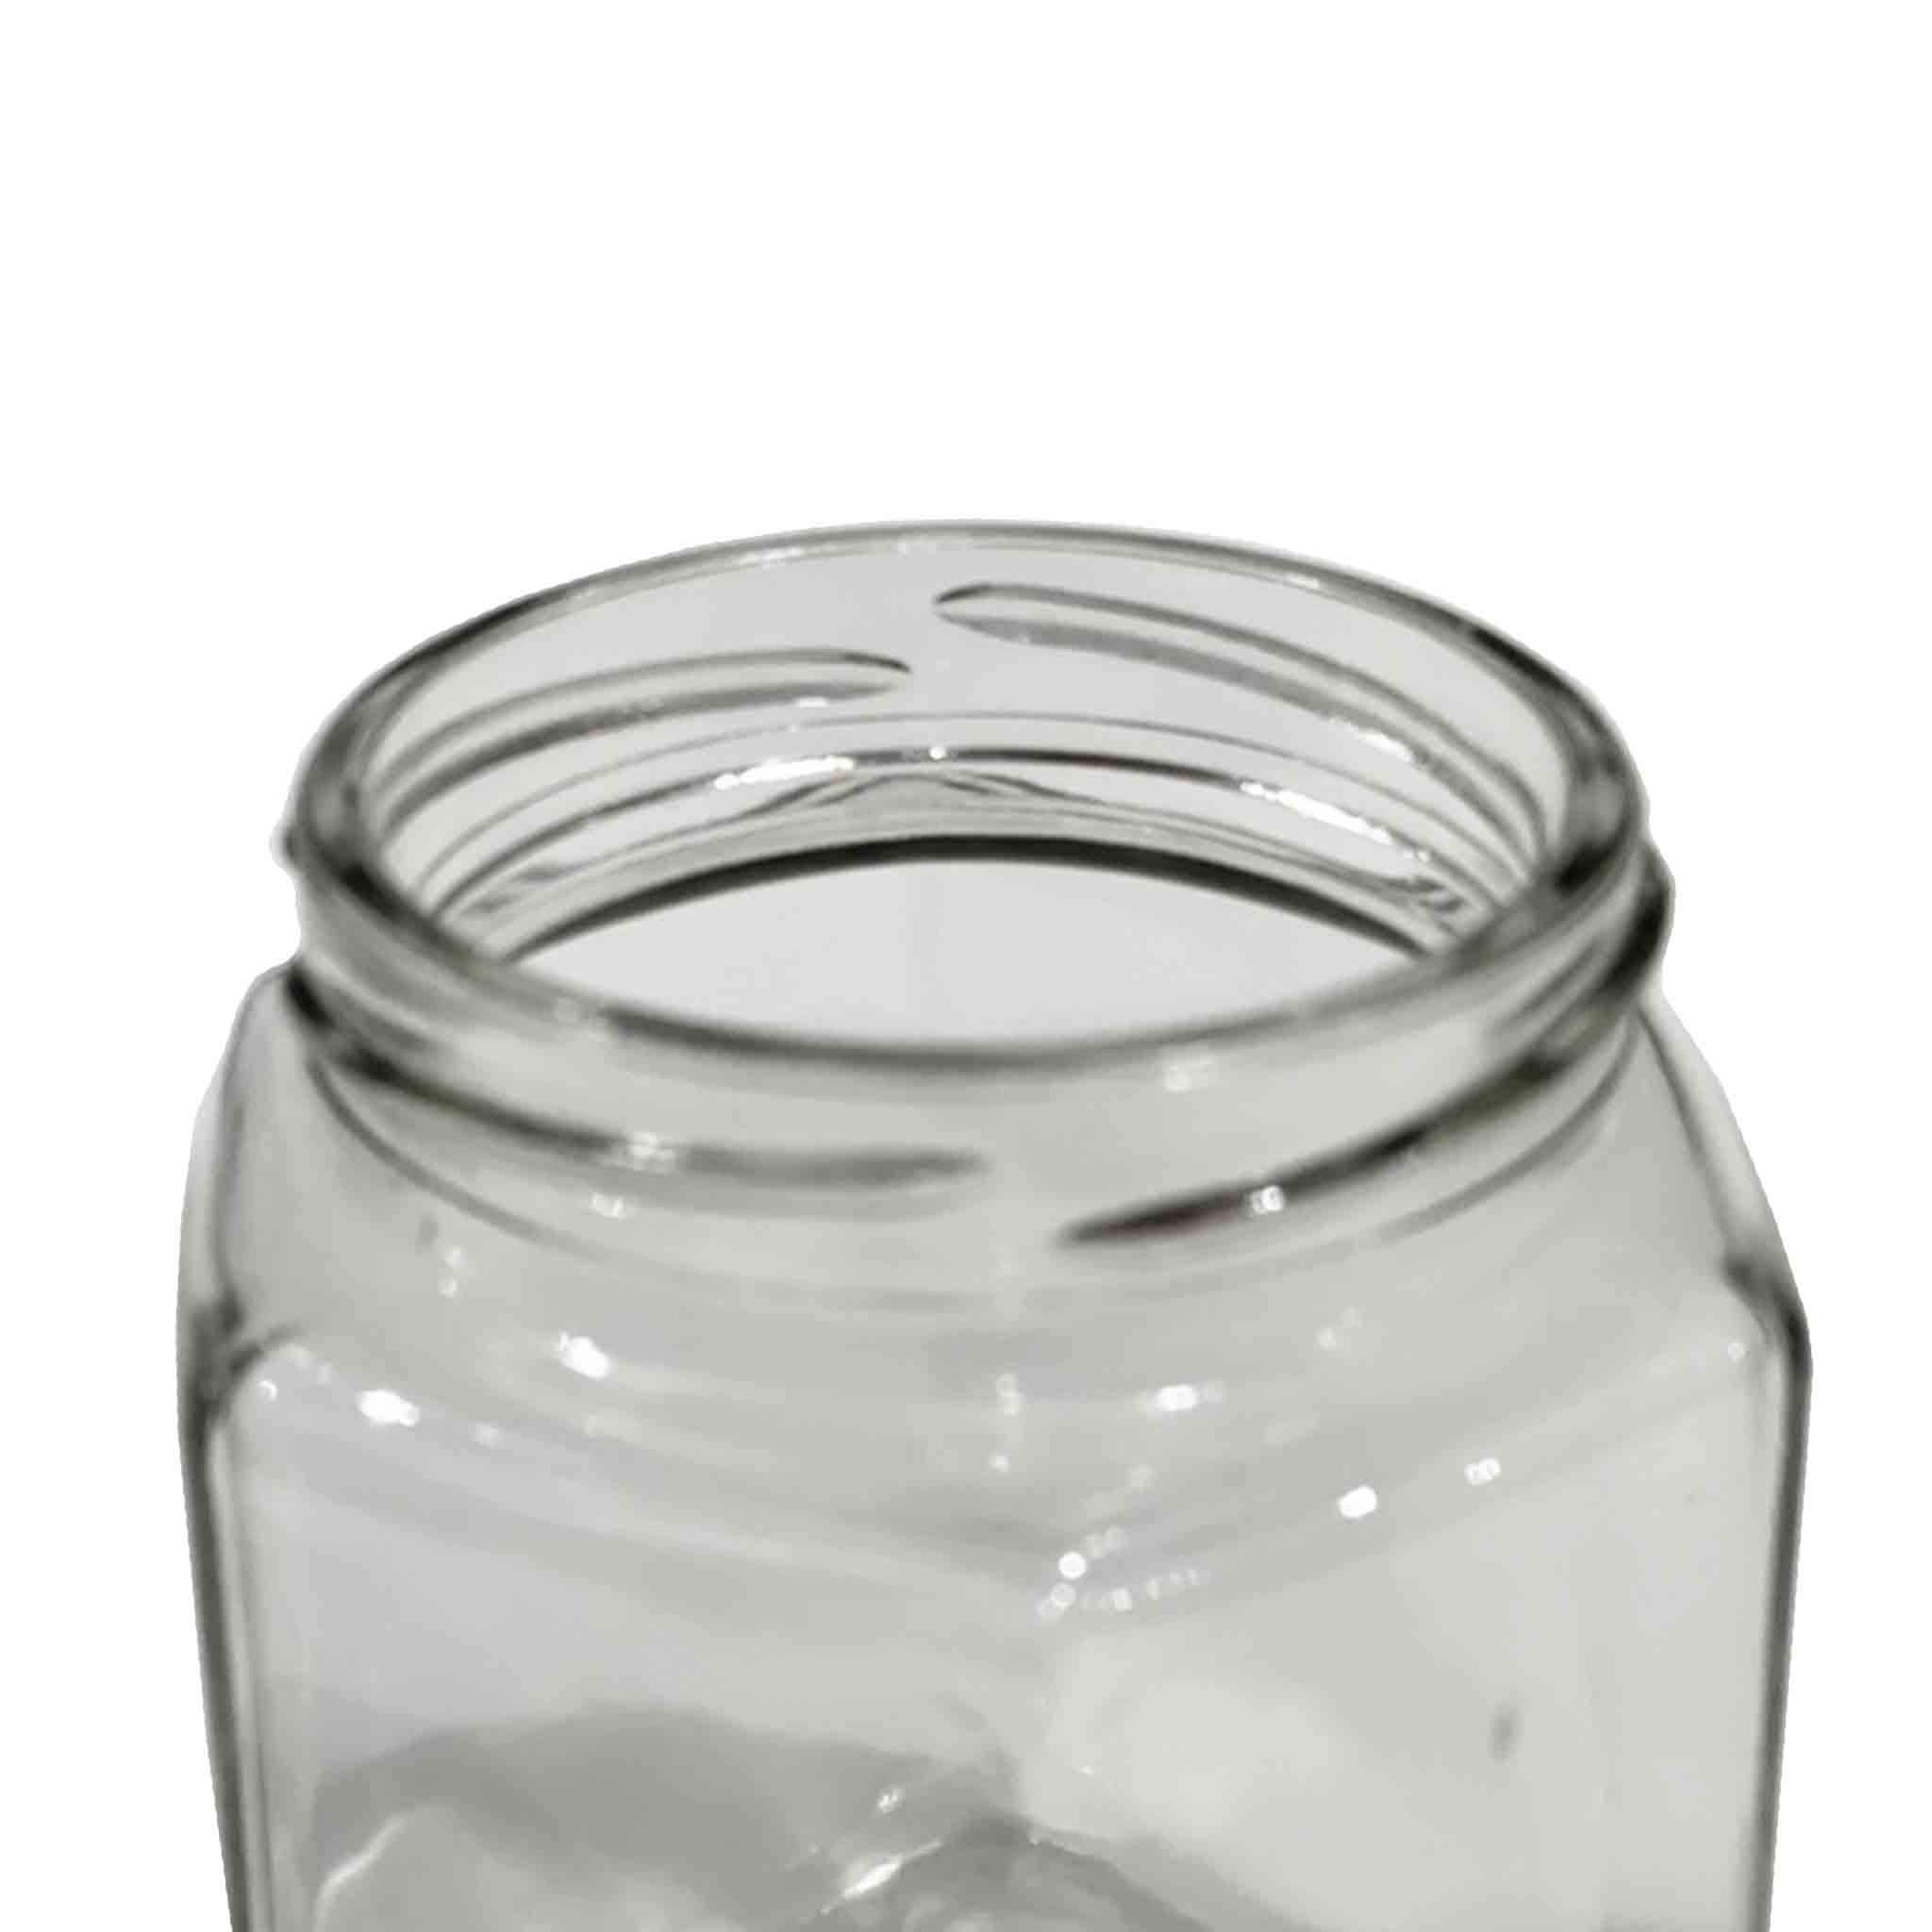 Honey Hexagonal Clear Glass Jar - 380ml (72 Pack) - Processing collection by Buzzbee Beekeeping Supplies